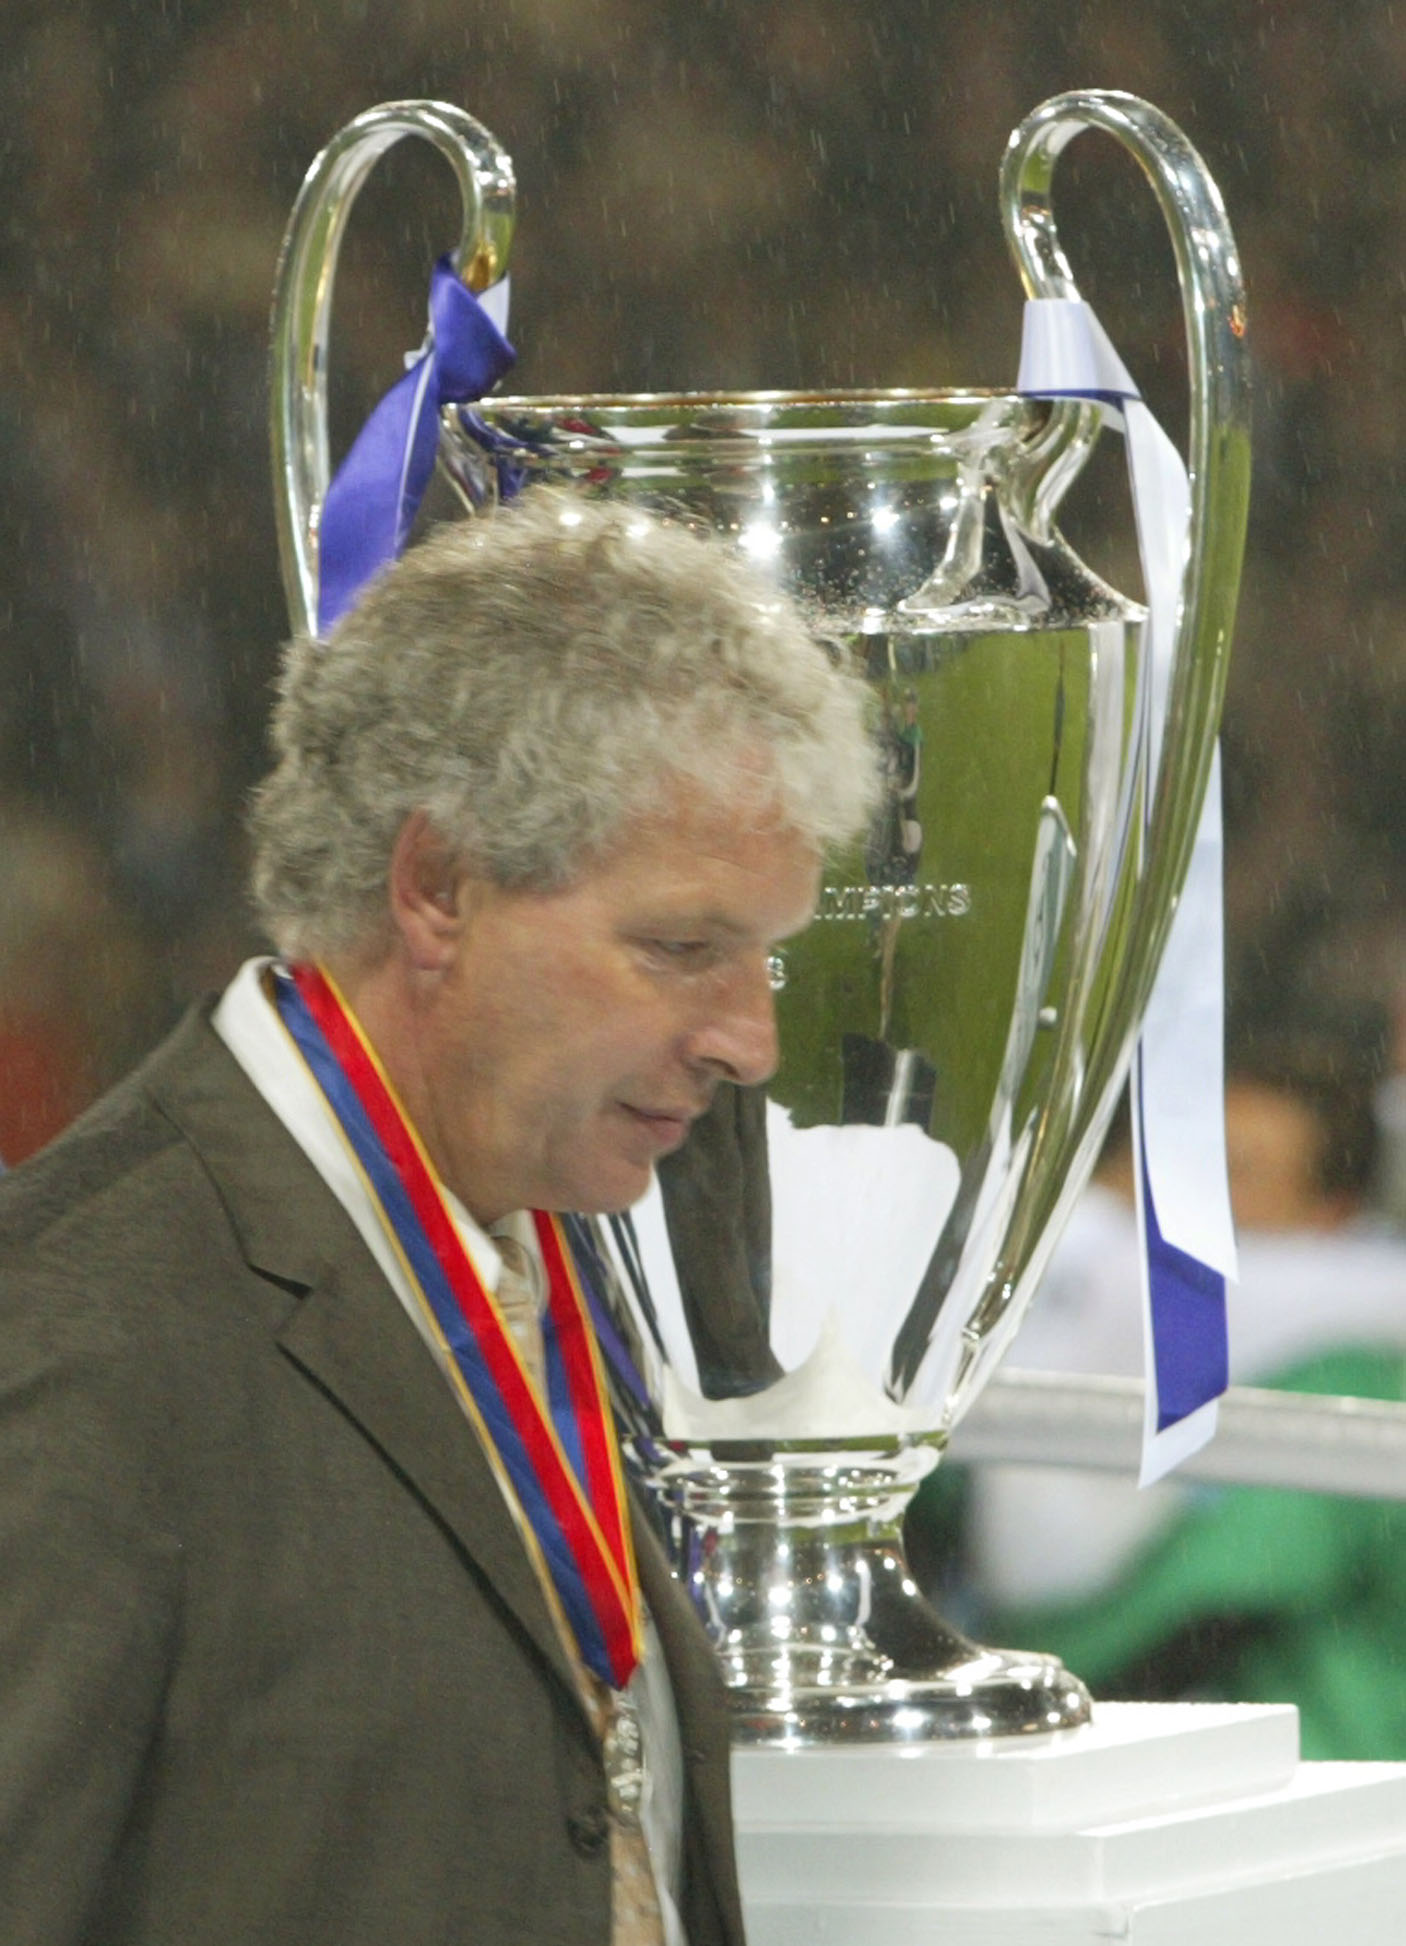 A dejected Klaus Toppmoller, coach of Bayer Leverkusen, walks past the trophy, after his side was defeated by Real Madrid in the UEFA Champions League Final at Hampden Park stadium in Glasgow, Scotland, Wednesday May 15, 2002.(AP Photo/Frank Augstein)